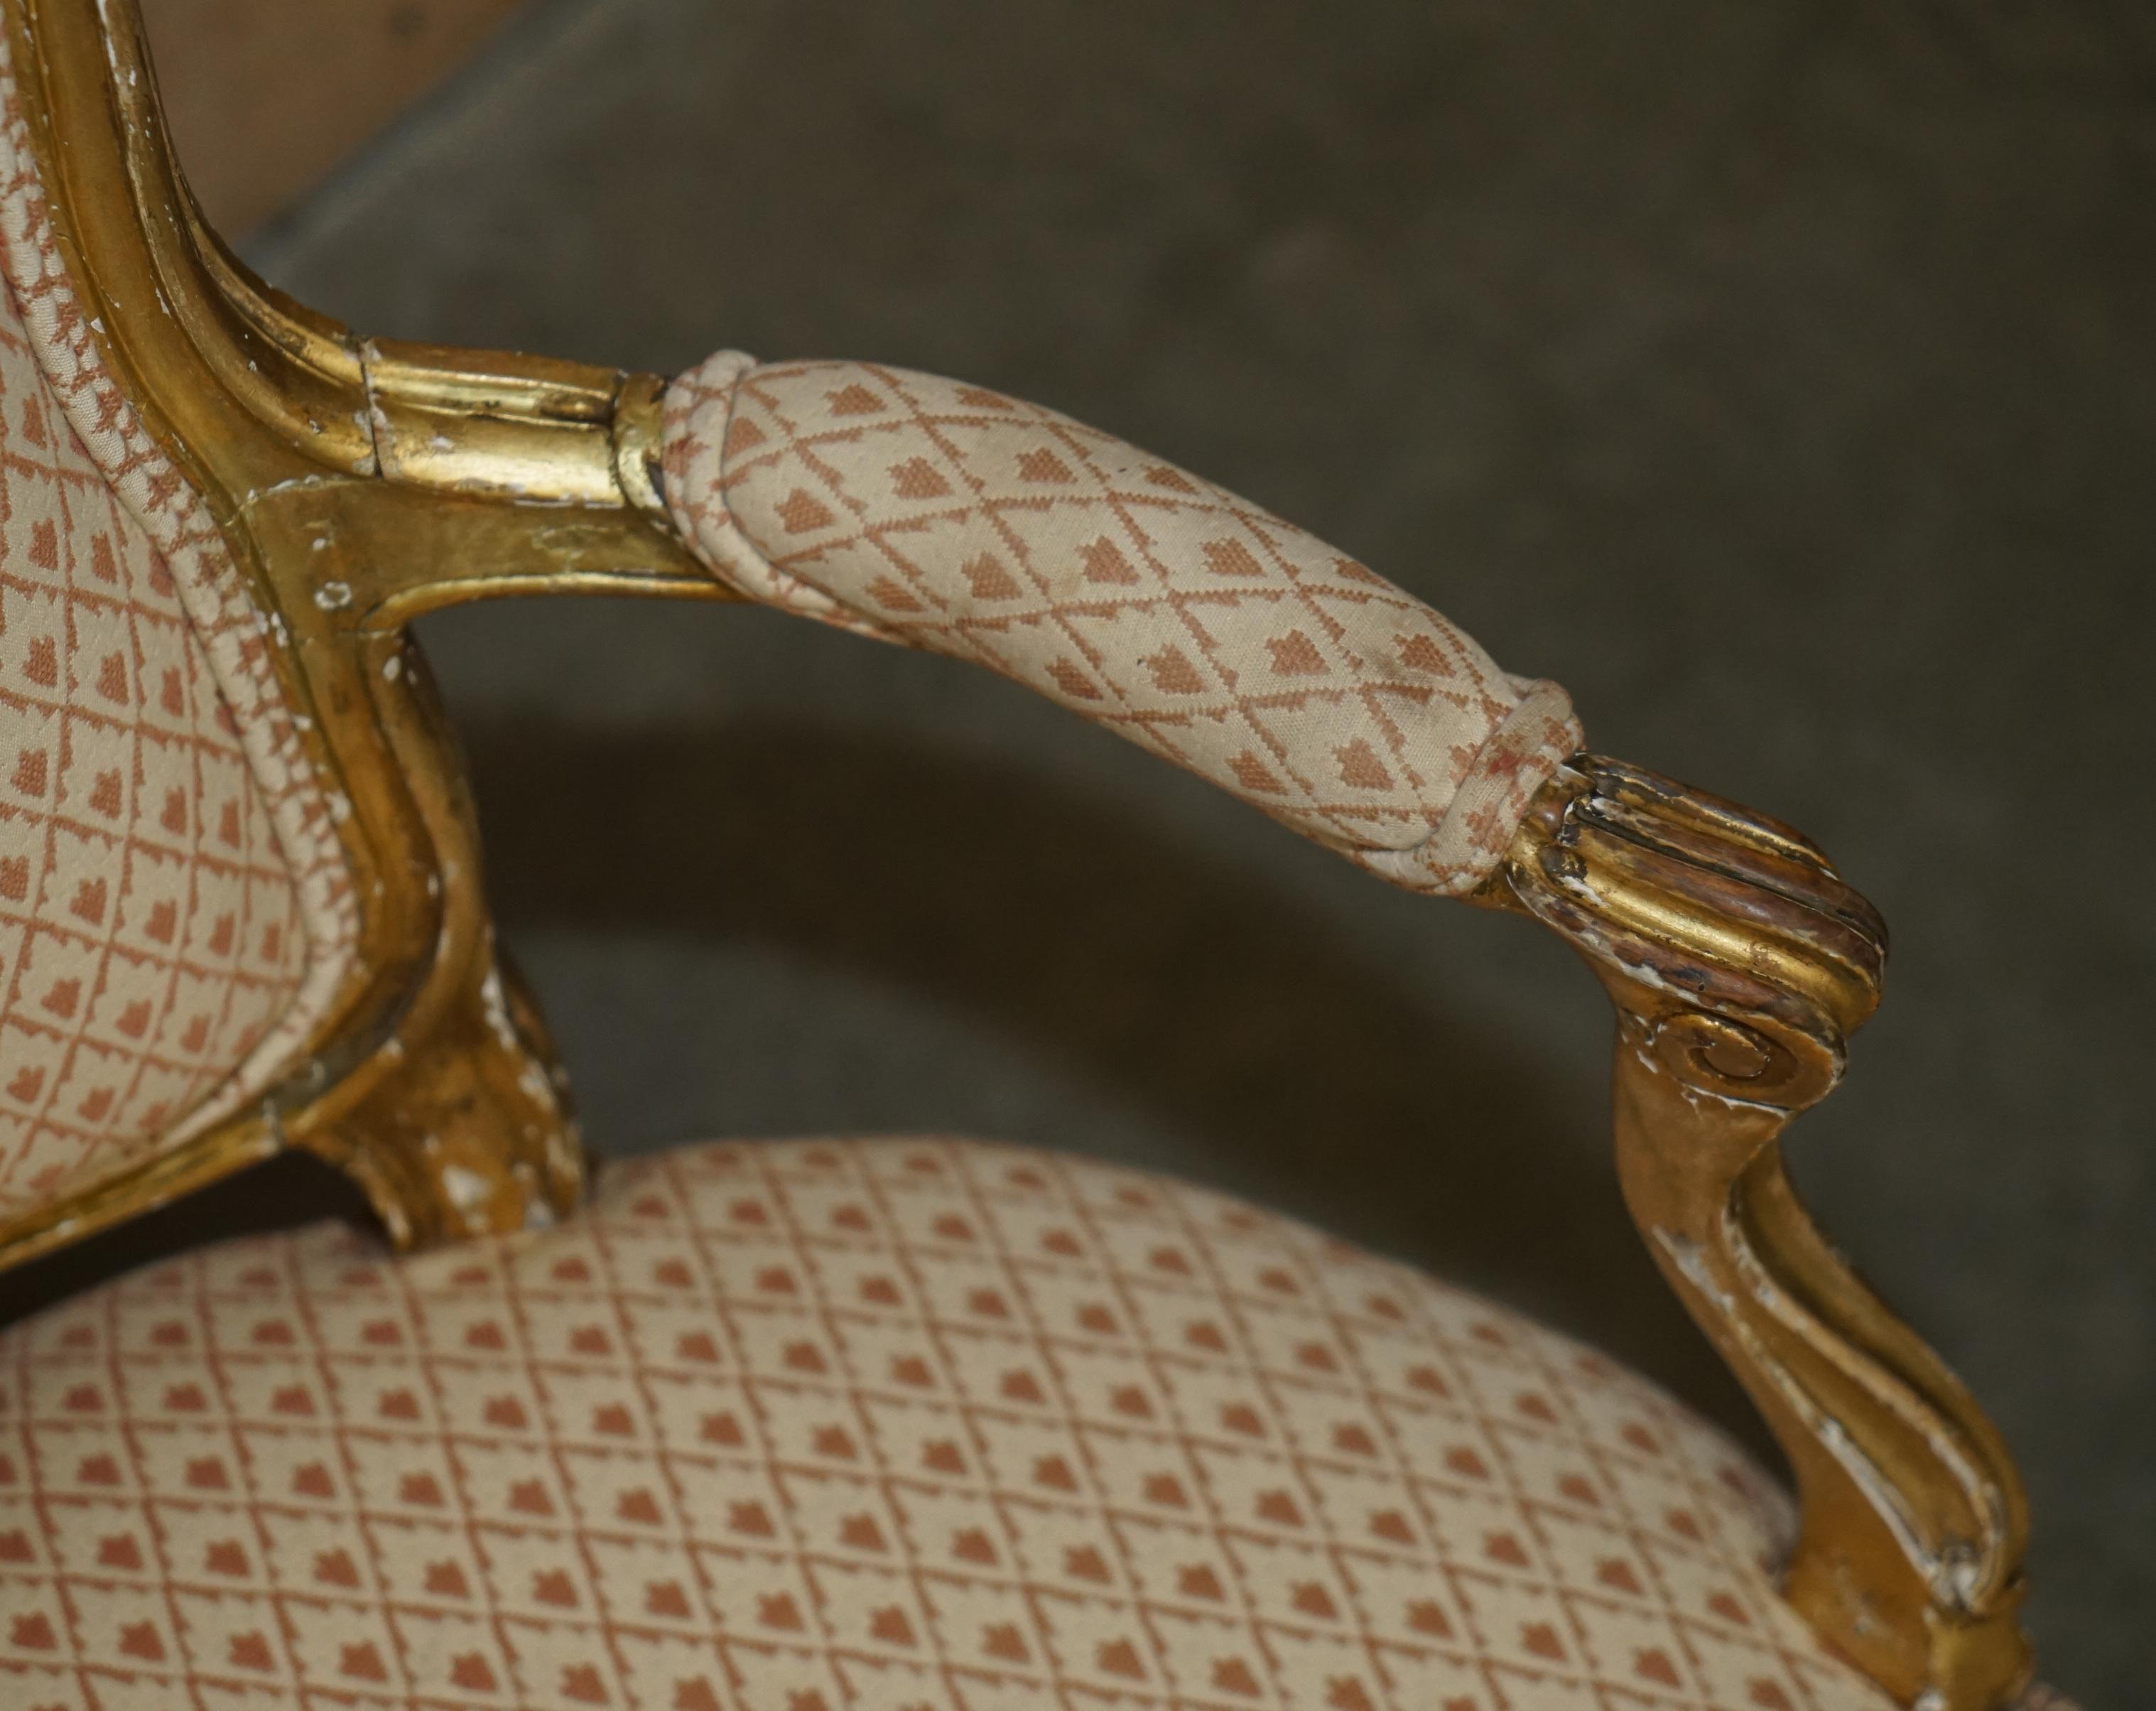 Upholstery FINE GOLD GILTWOOD 18TH CENTURY CLAW & BALL FEET CARVED ANTIQUE BERGERE ARMCHAiR For Sale